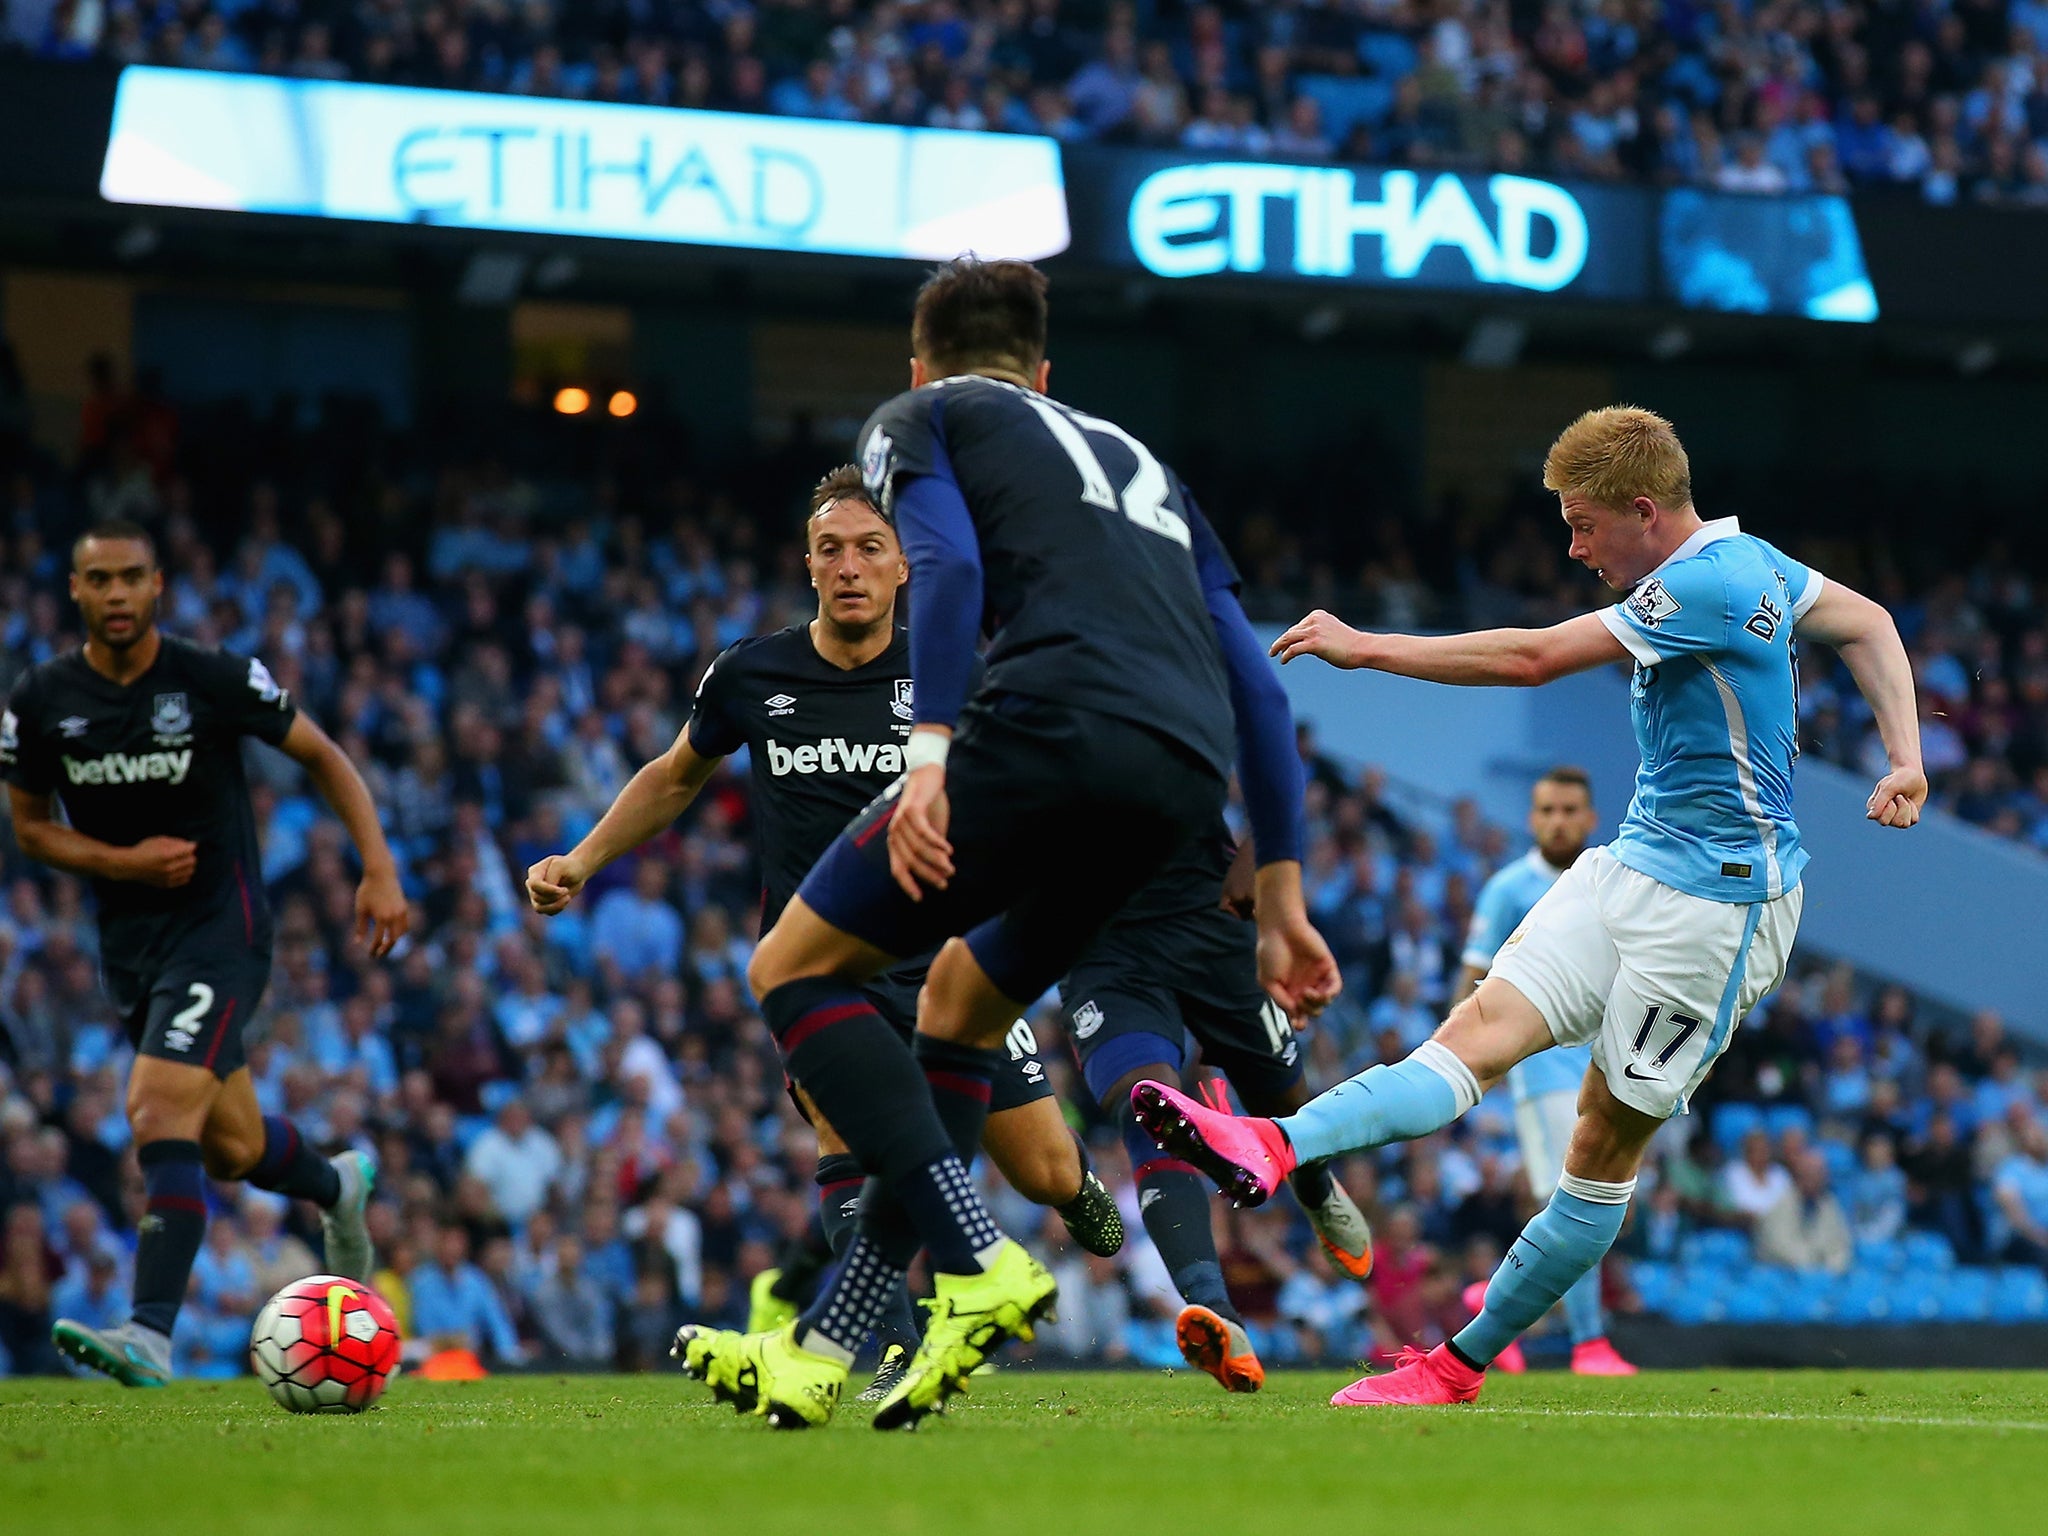 Kevin De Bruyne scored his first goal for the club but it wasn't enough